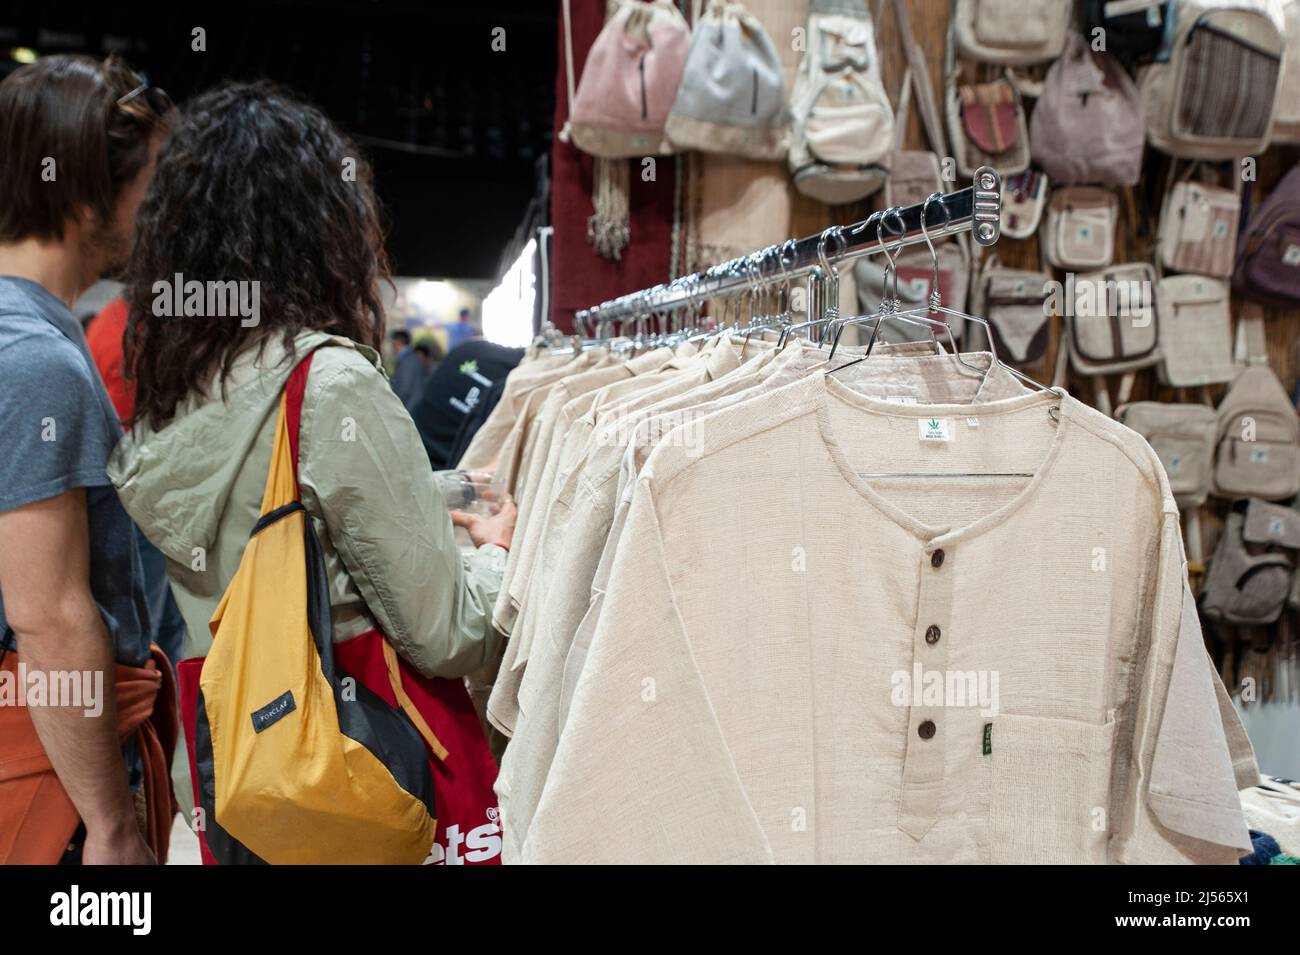 Visitors at the trade show “Indicasativa 2022” devoted to the hemp world. Shopping at the market stall. Canvas clothes in the foreground. Stock Photo